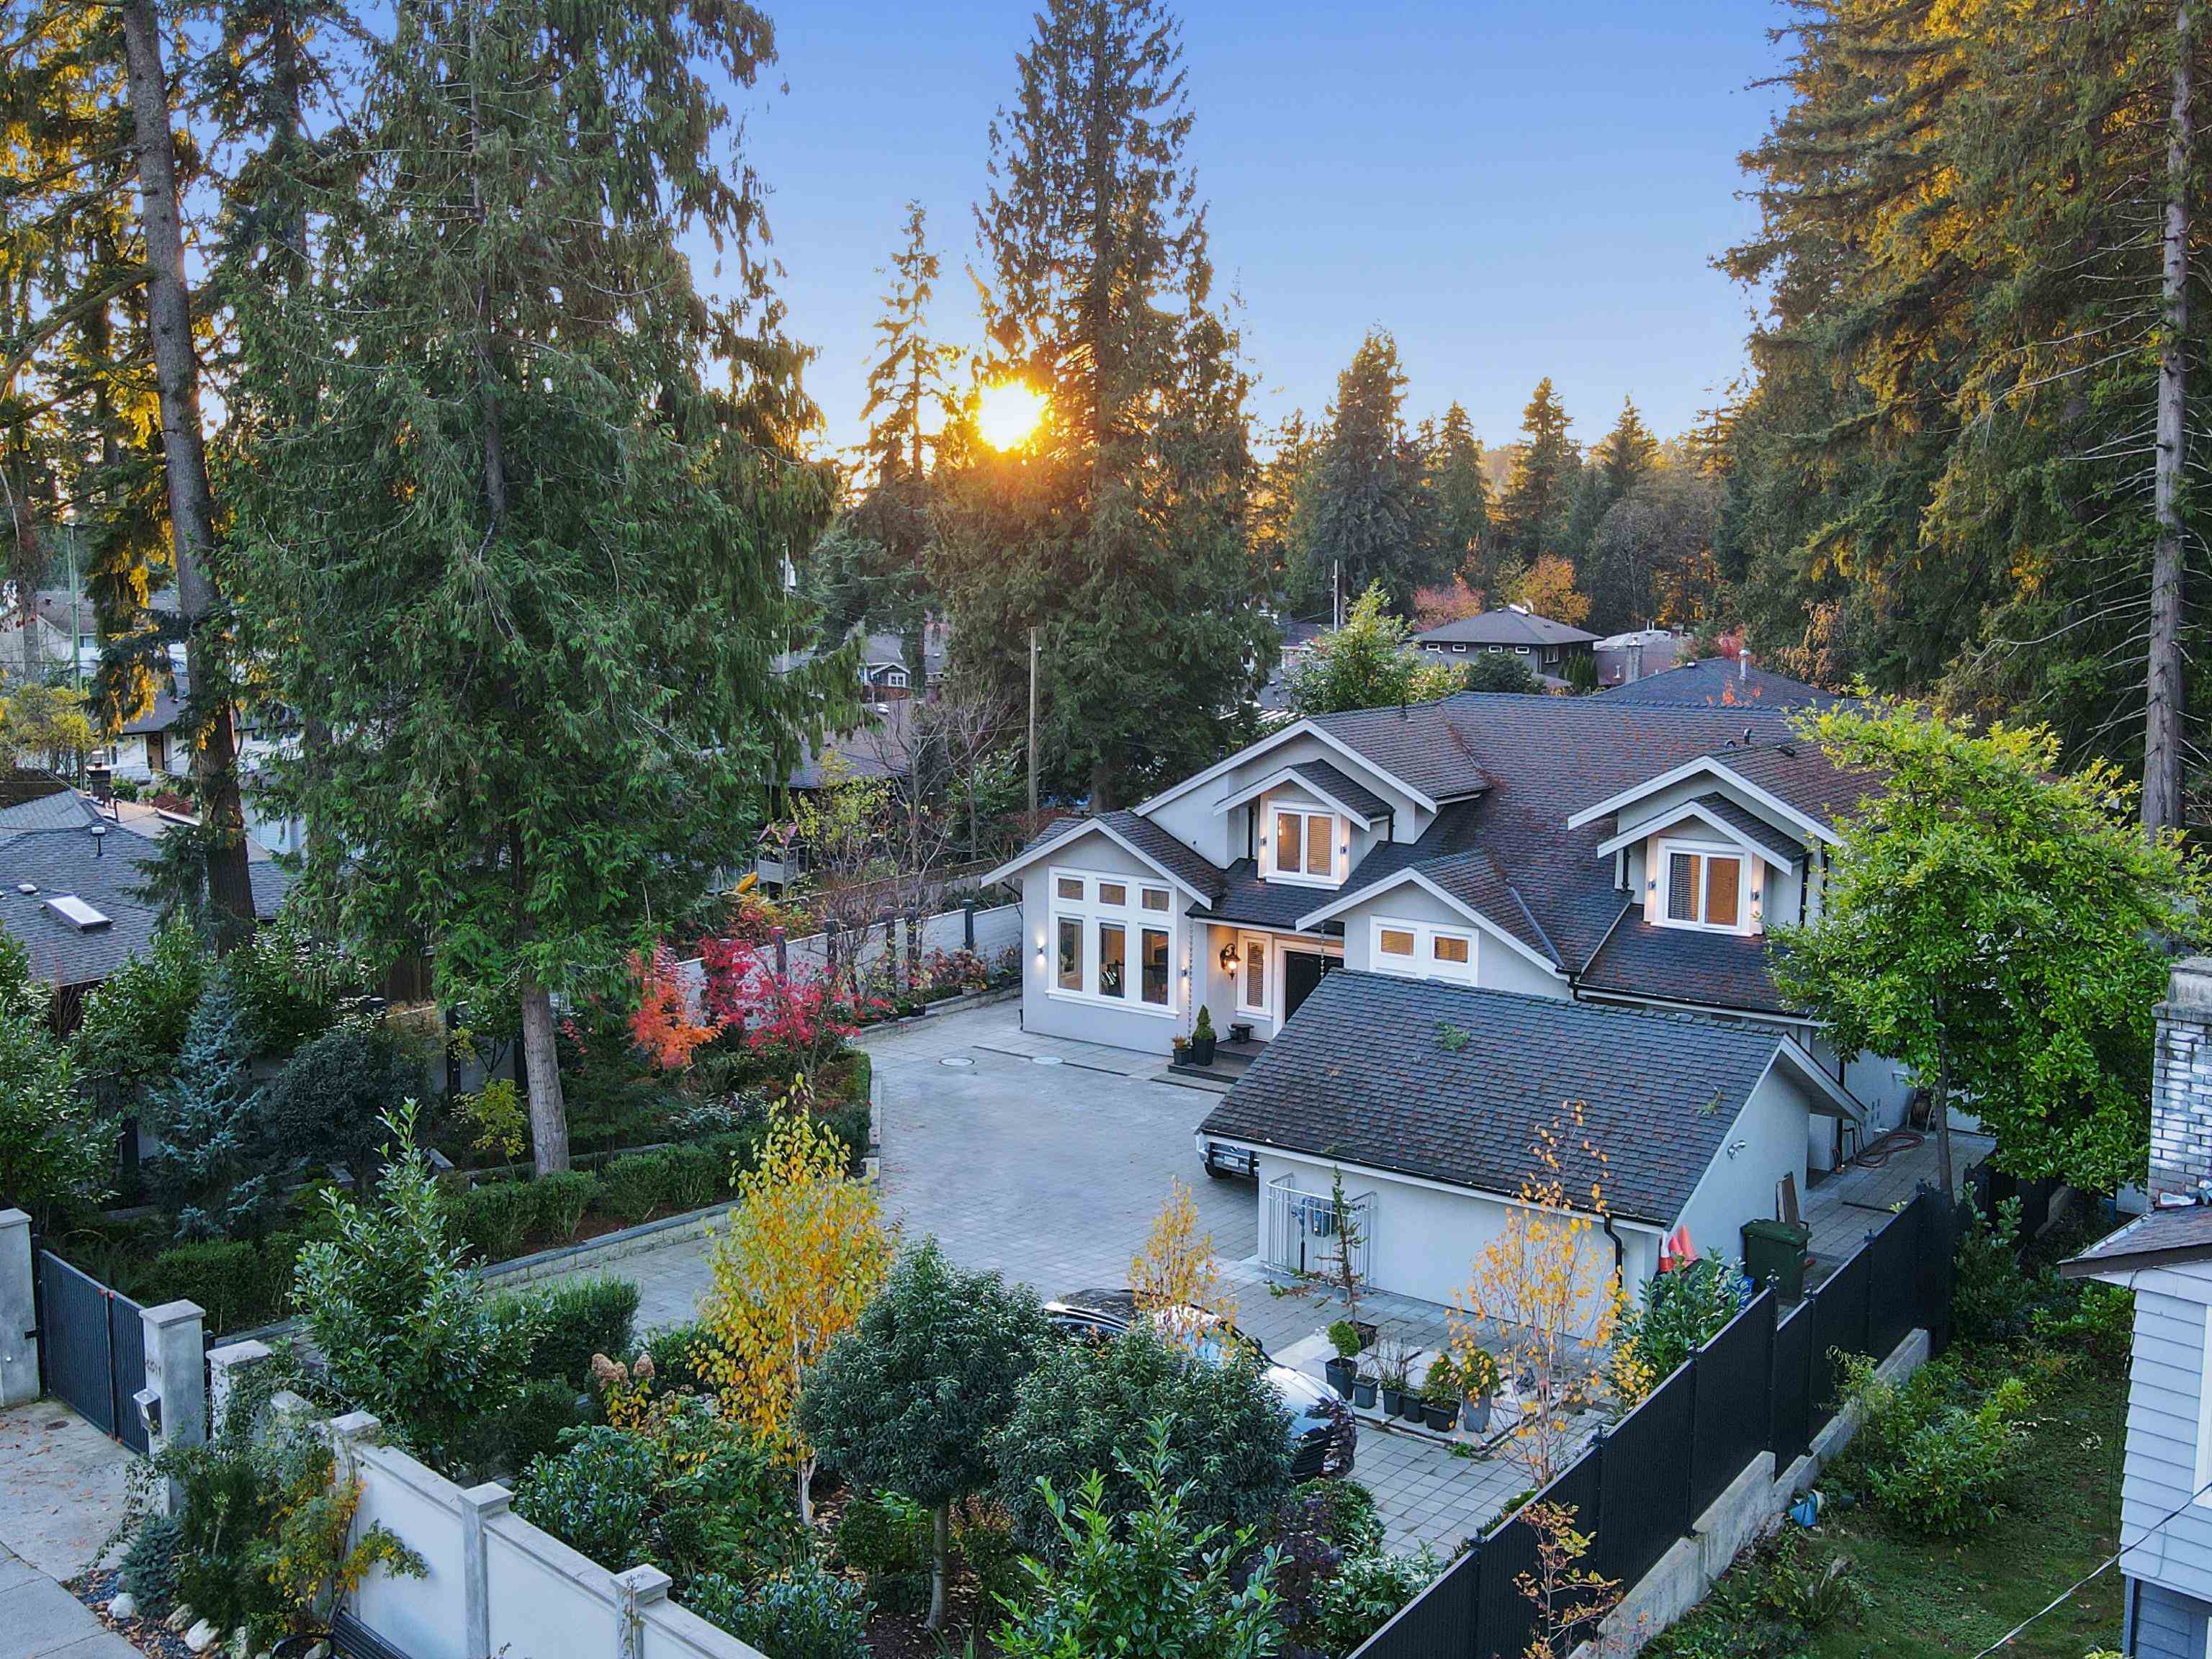 Listing image of 4511 CAPILANO ROAD